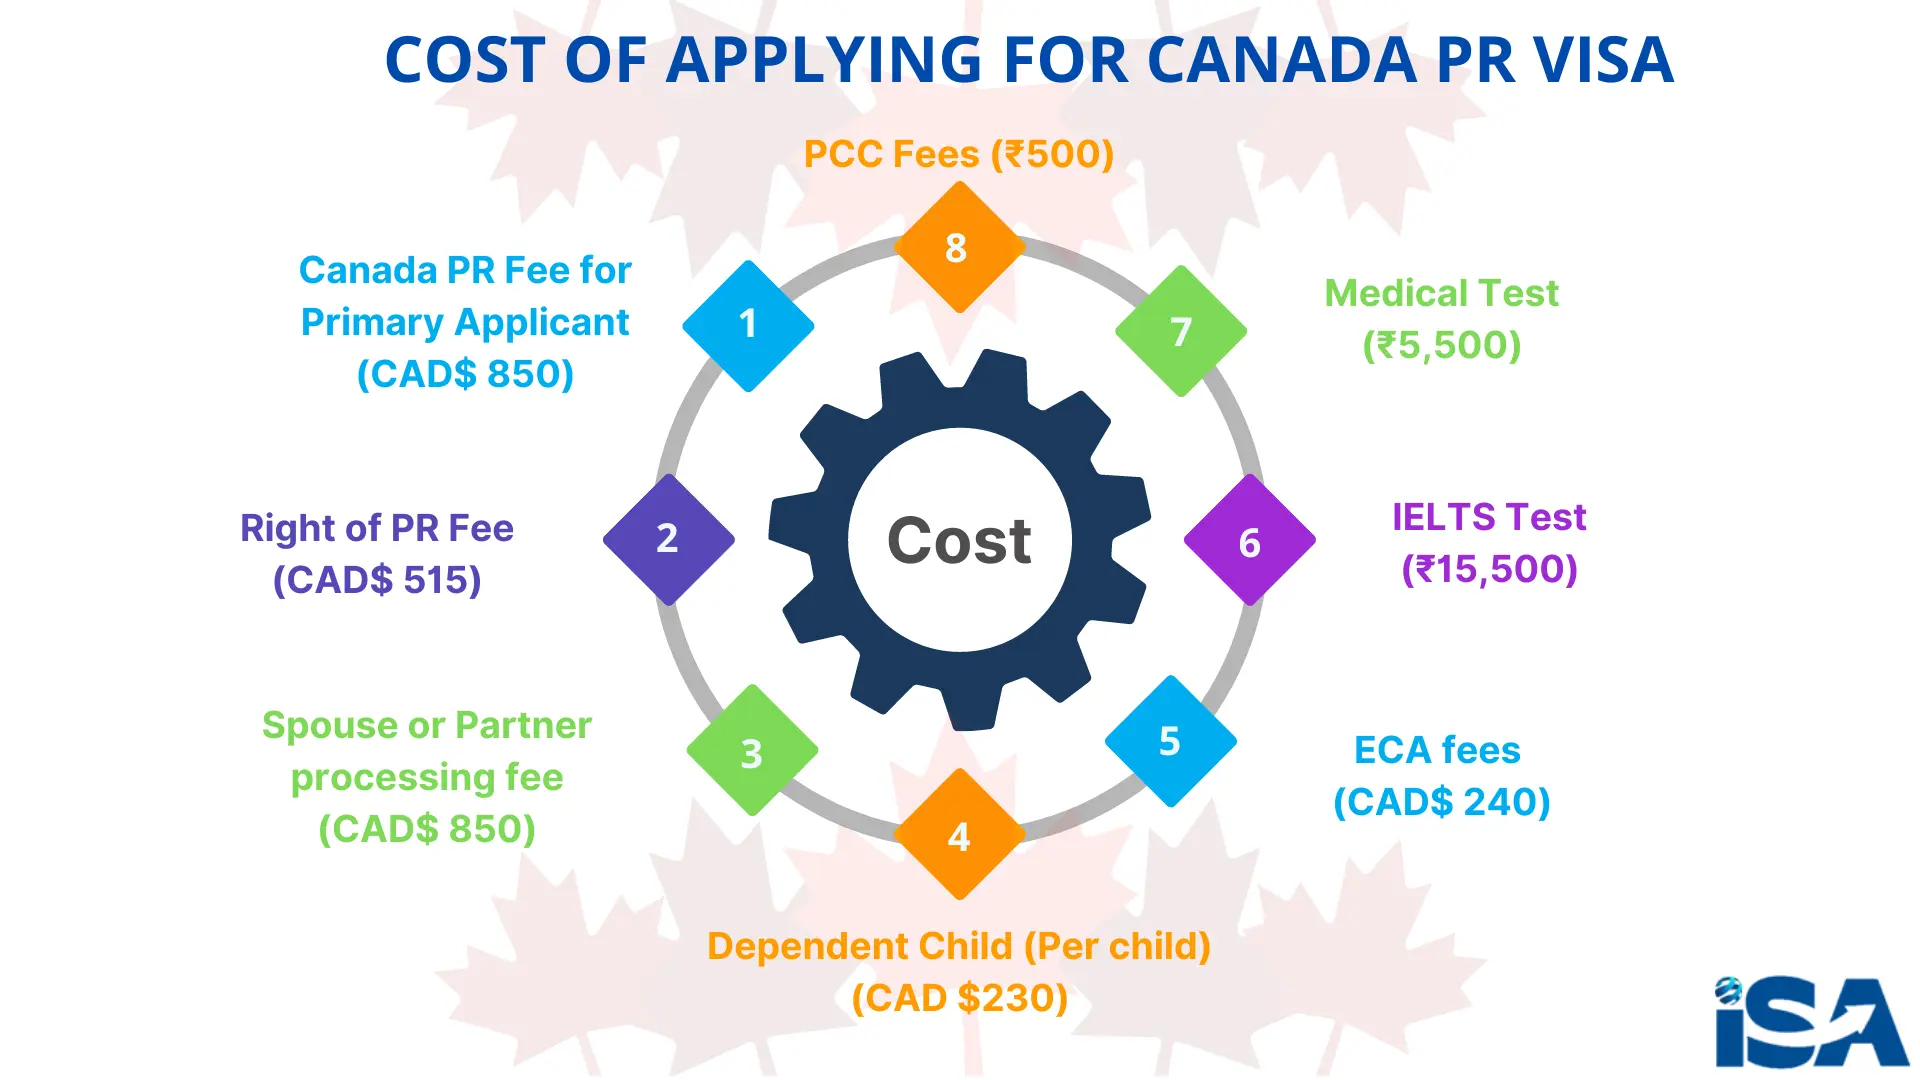 Total Cost of Canada Express Entry including cost of Visa, IELTS exam, Education assessment